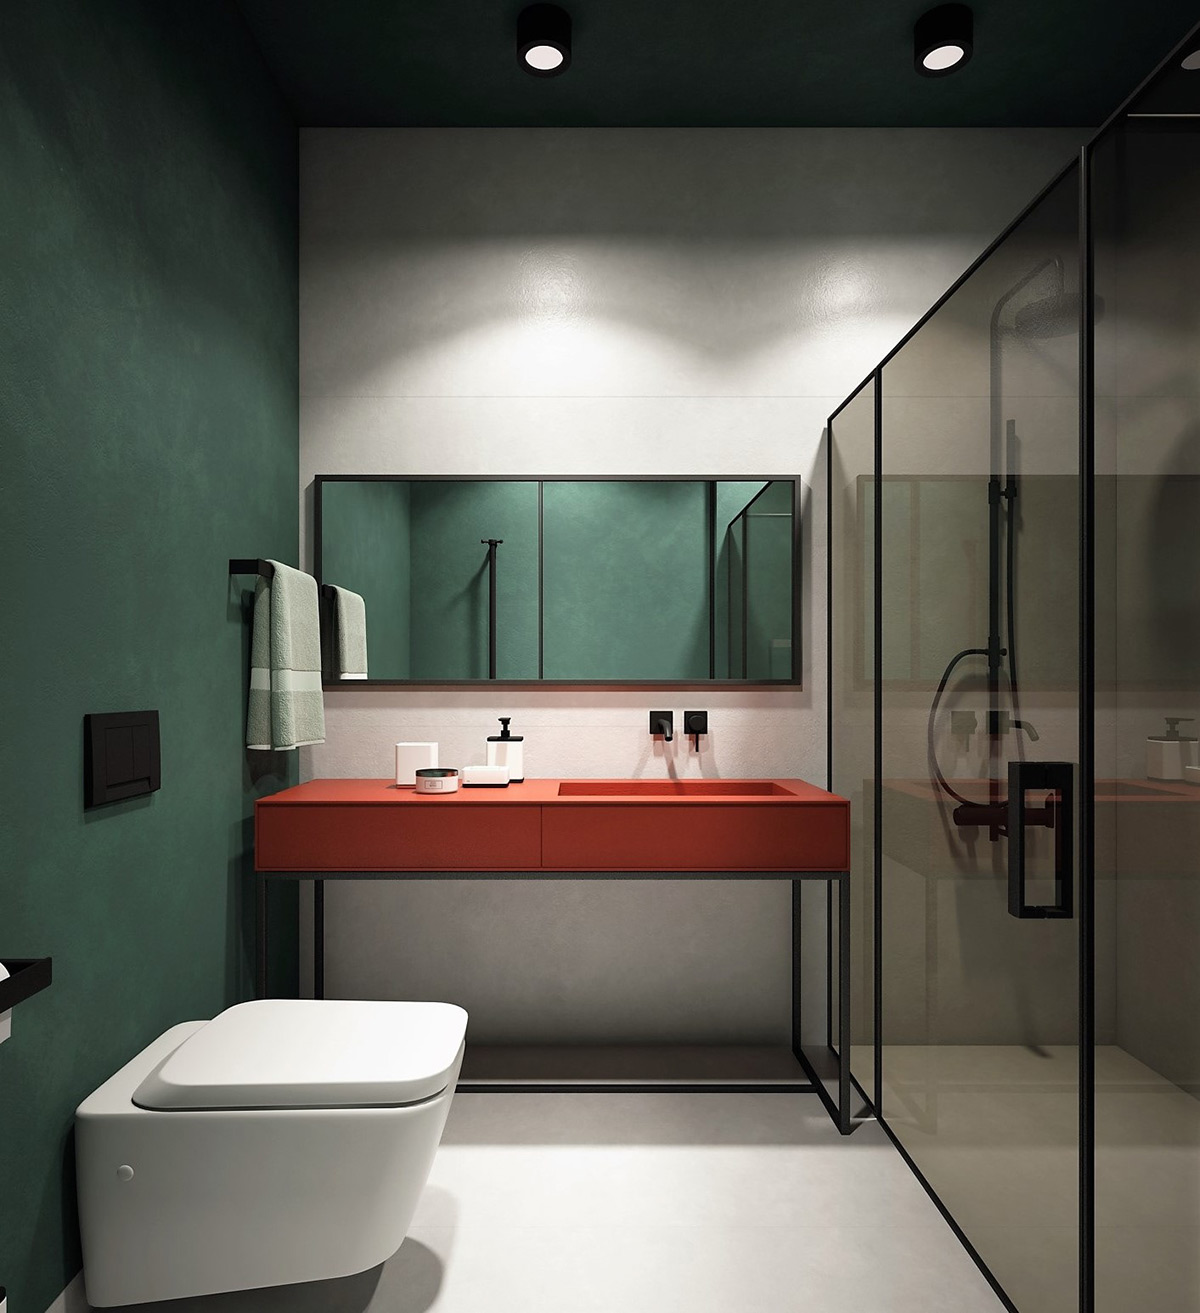 This standalone red vanity unit has a transformative effect on a dark green and white bathroom.